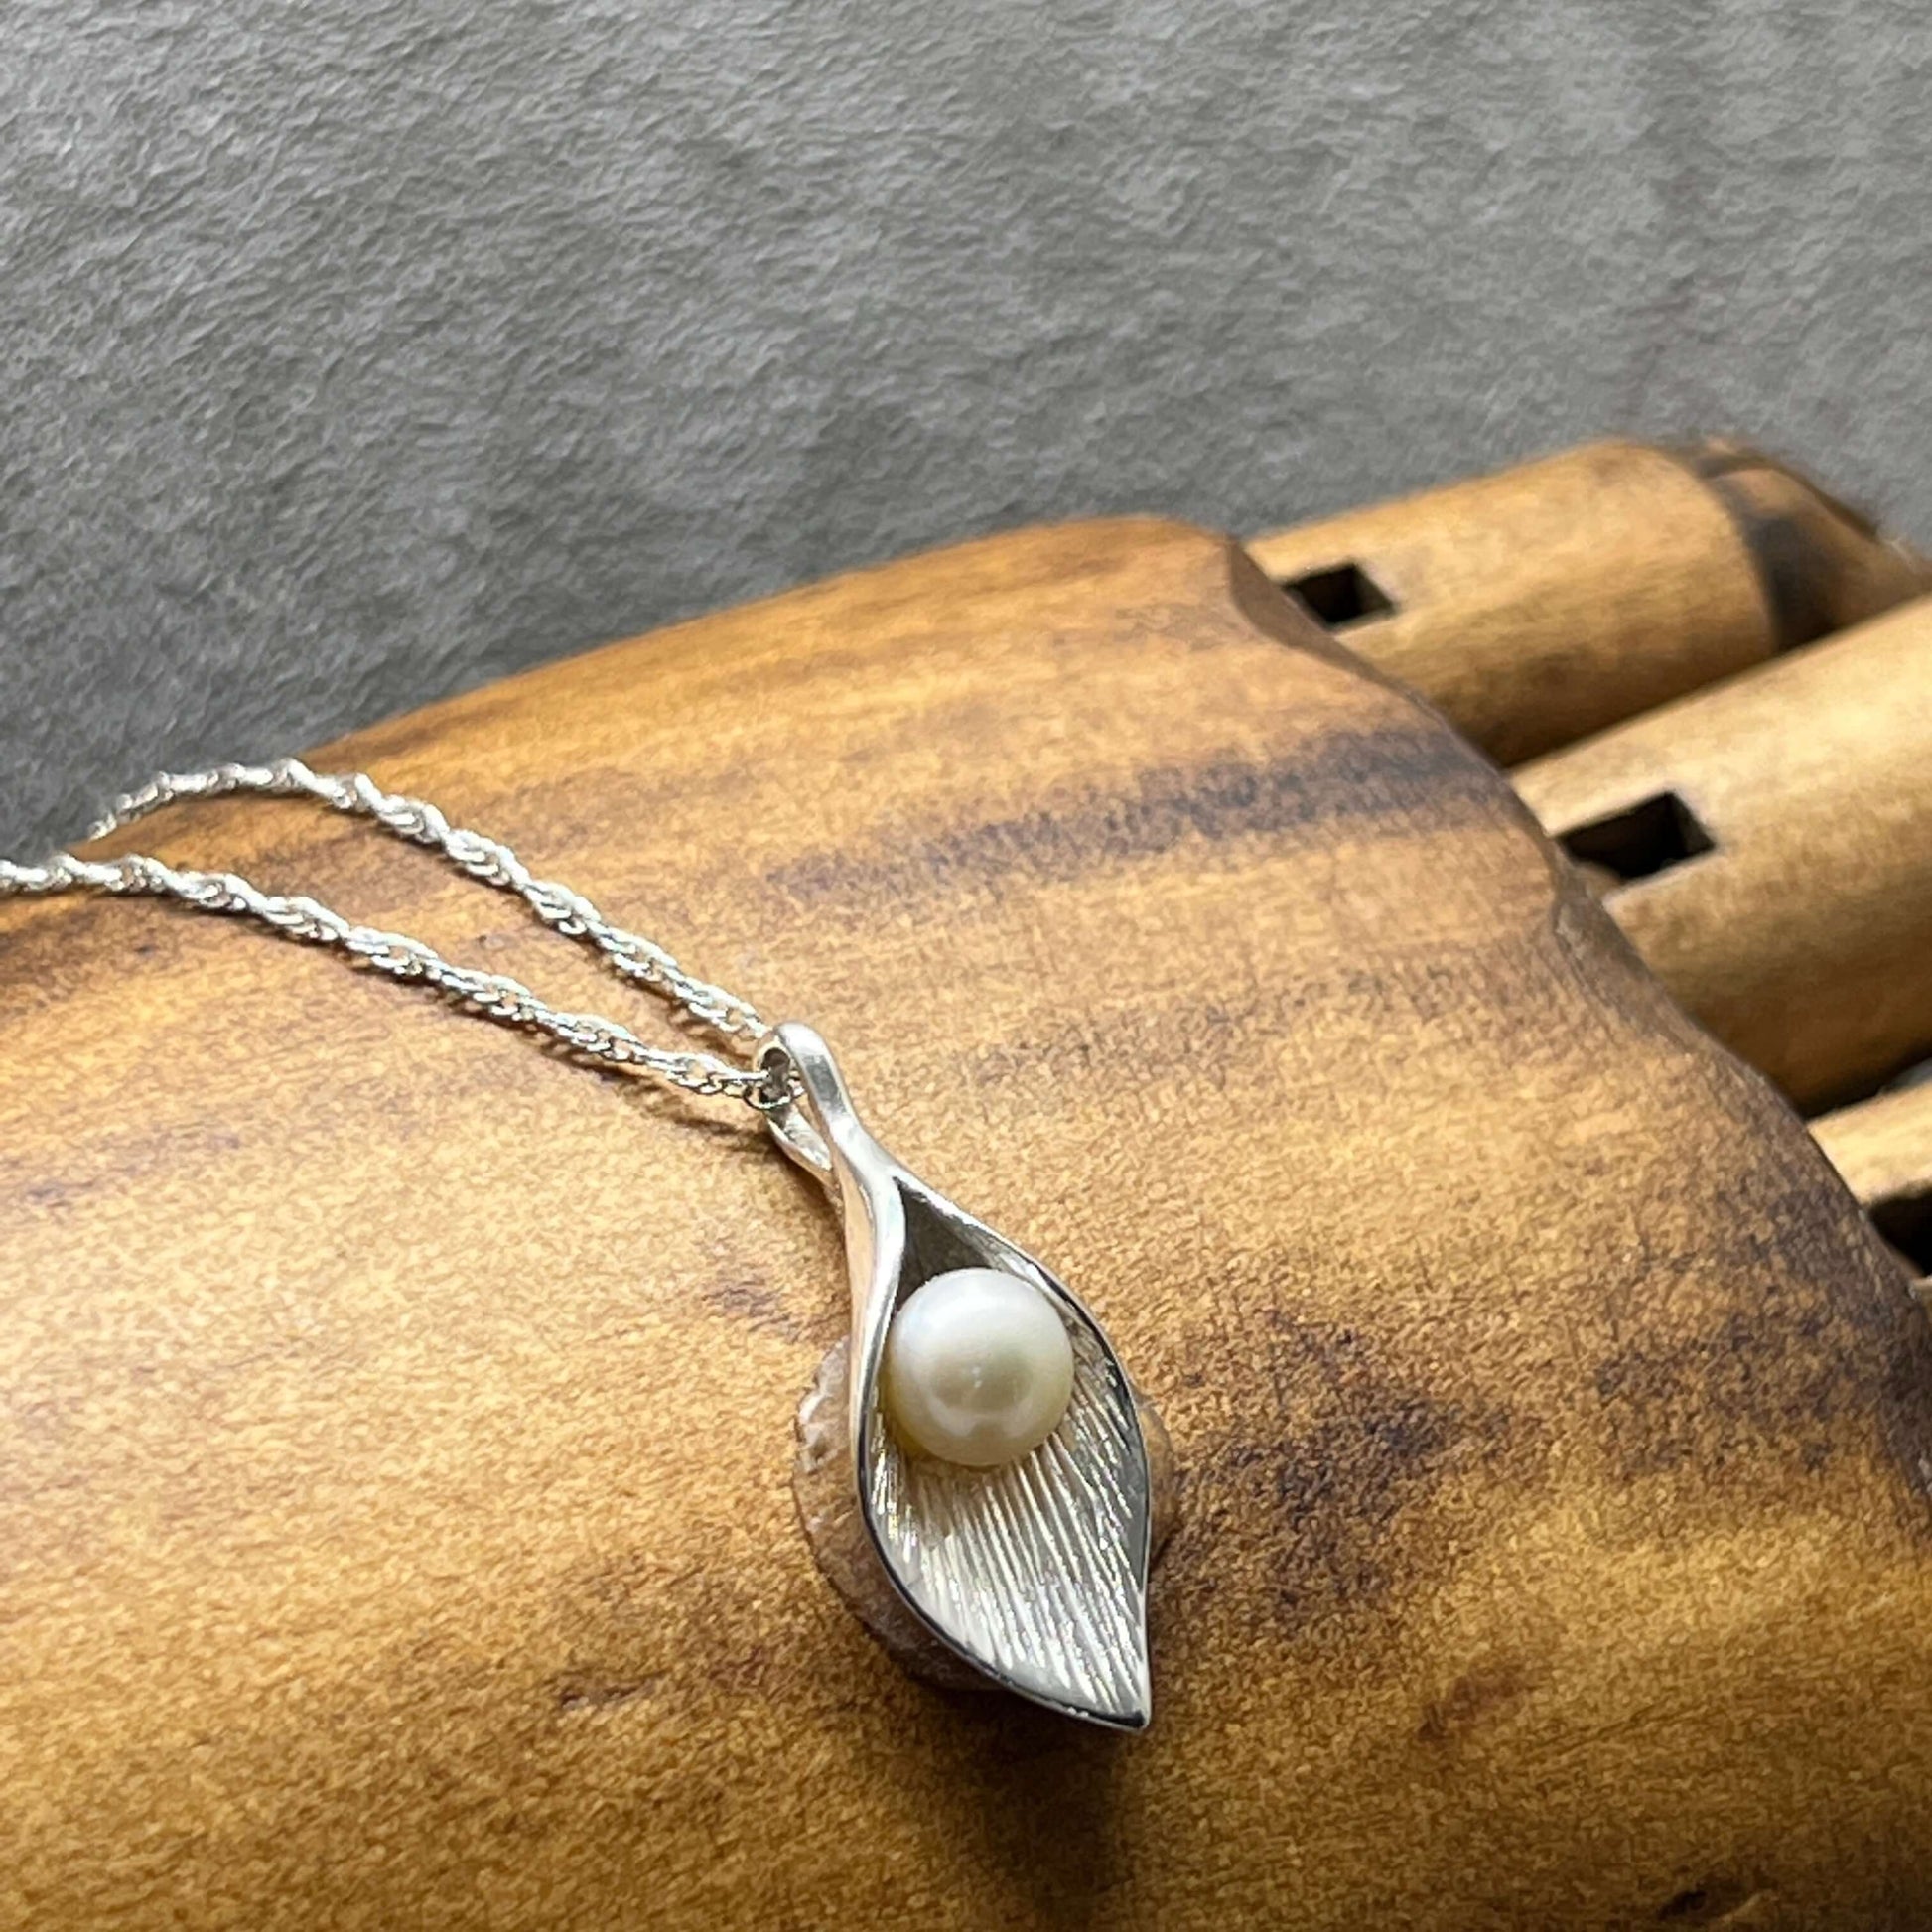 Hand Crafted Calla Lily in Sterling Silver & Freshwater Pearl Pendant - Twelve Silver Trees